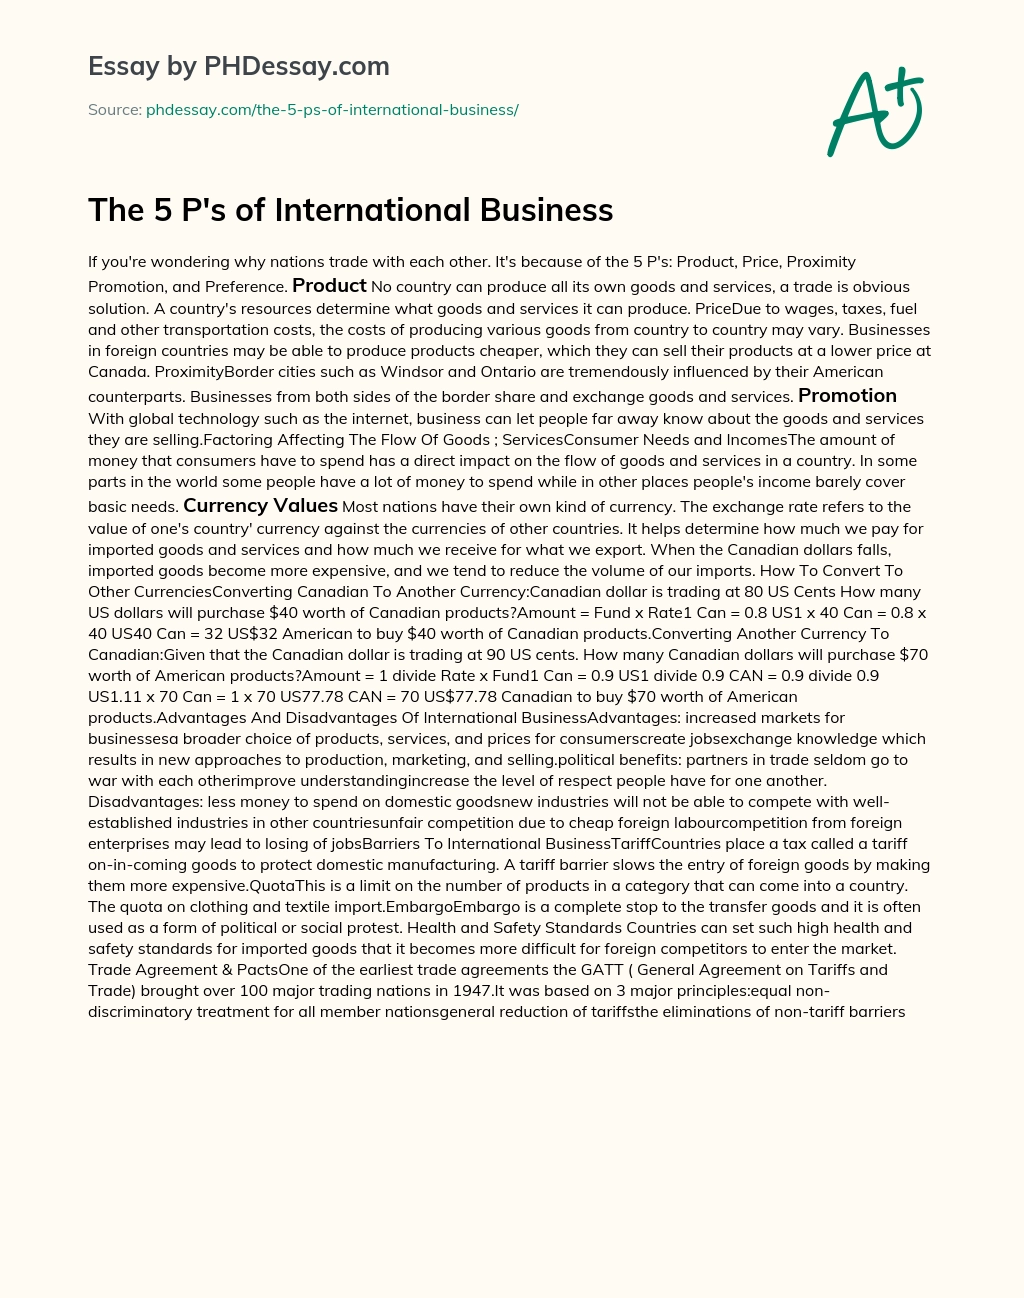 The 5 P’s of International Business essay